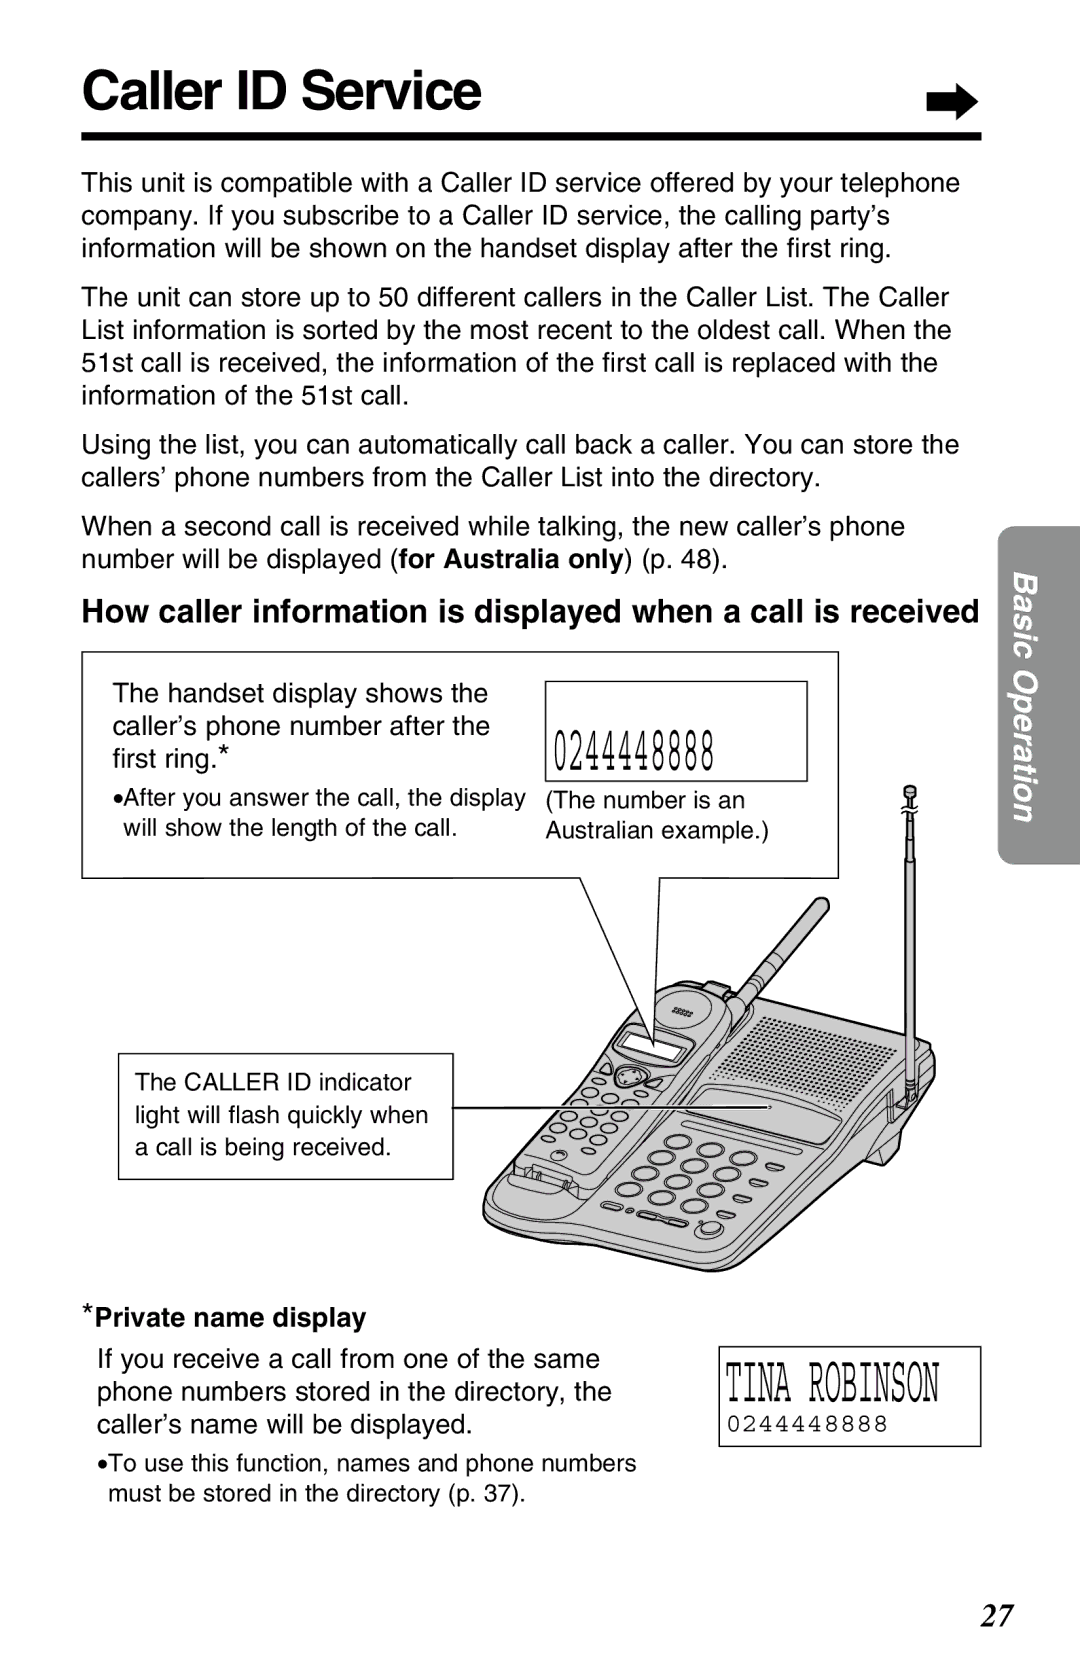 Panasonic KX-TC1220NZW Caller ID Service, How caller information is displayed when a call is received, ﬁrst ring 